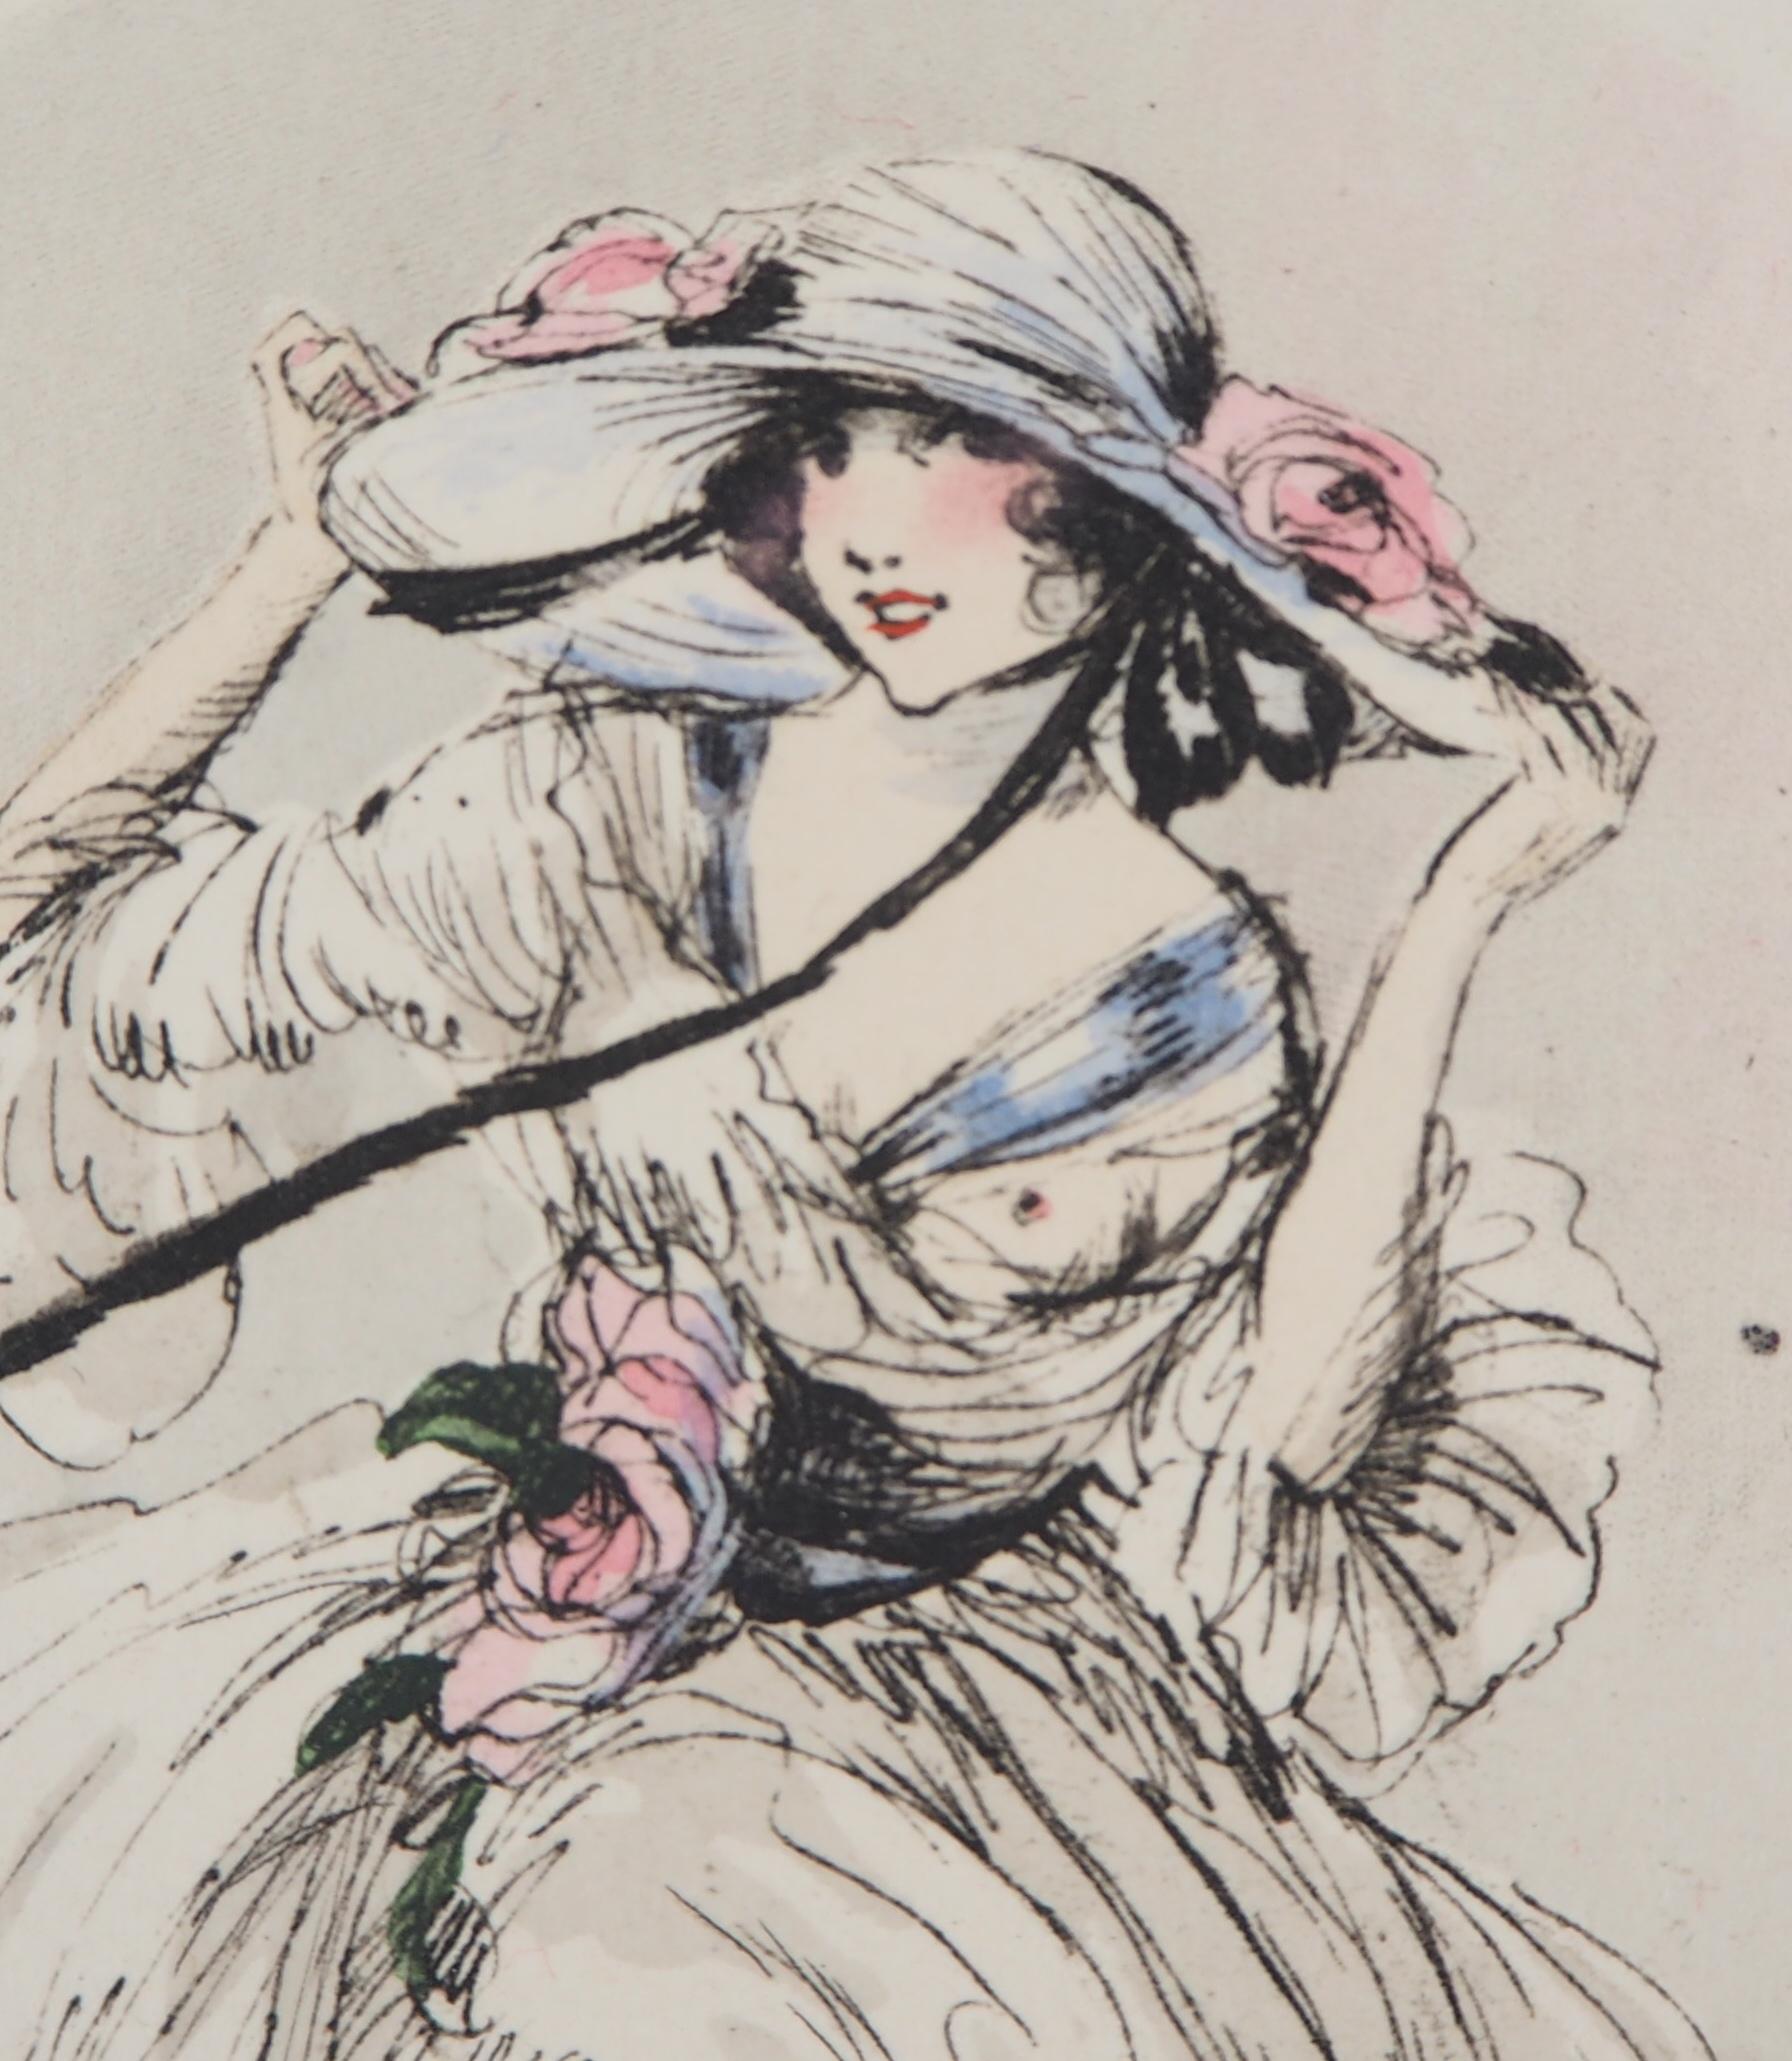 Louis Icart
Woman with Tall Hat

Original etching and stencil
Printed signature in the plate
On vellum 19 x 29 cm (c. 8 x 12 in)

Excellent condition